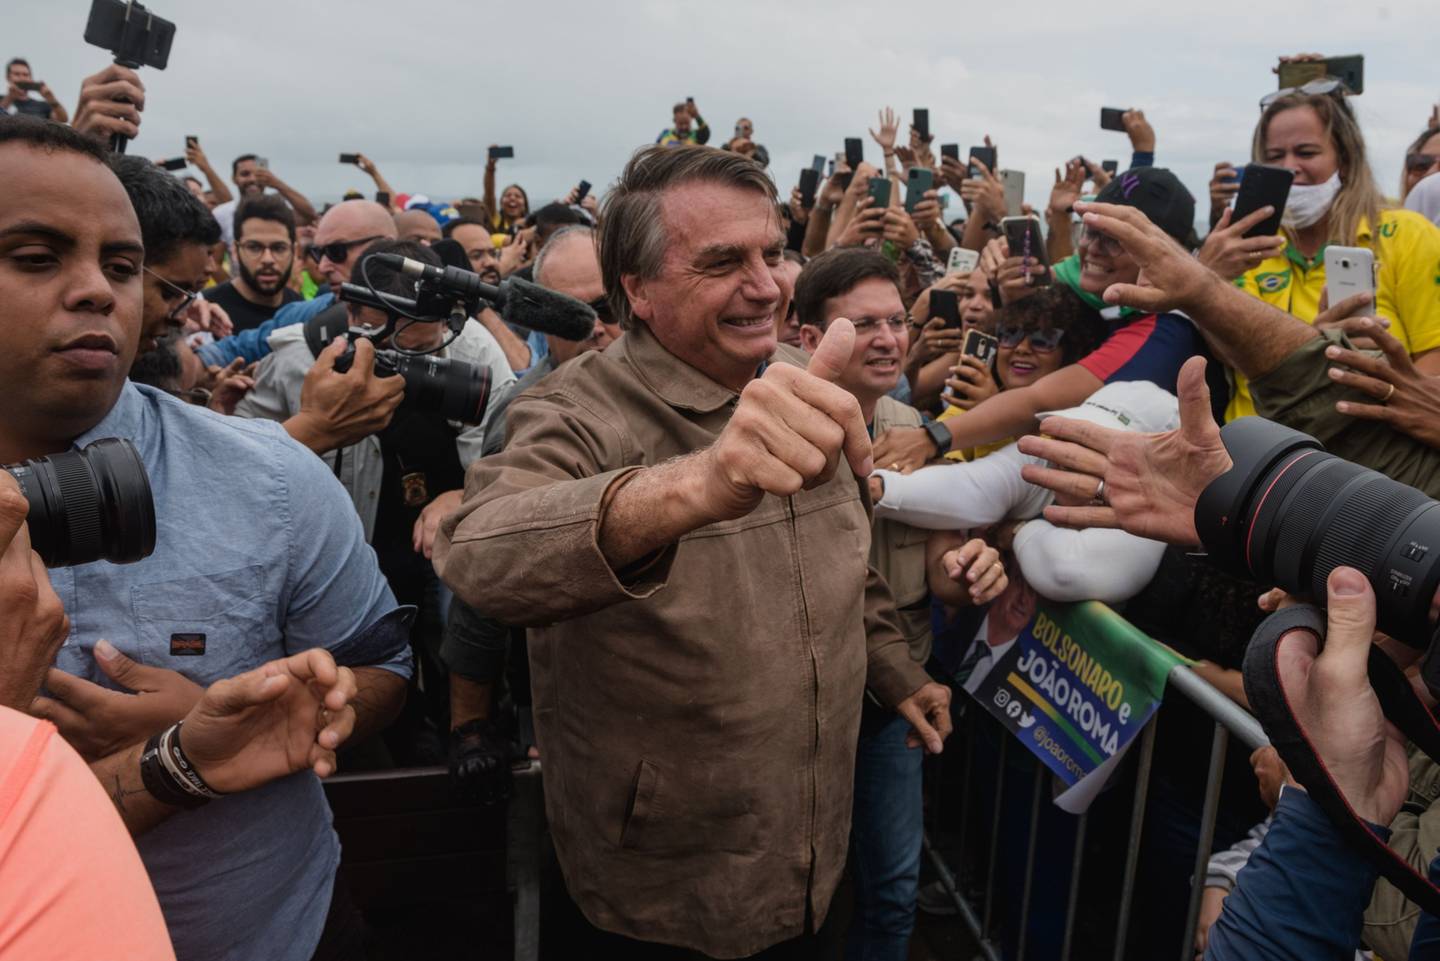 With just over two months before the first round of voting, opinion surveys widely show Brazilians think they’d be better off without Bolsonaro.